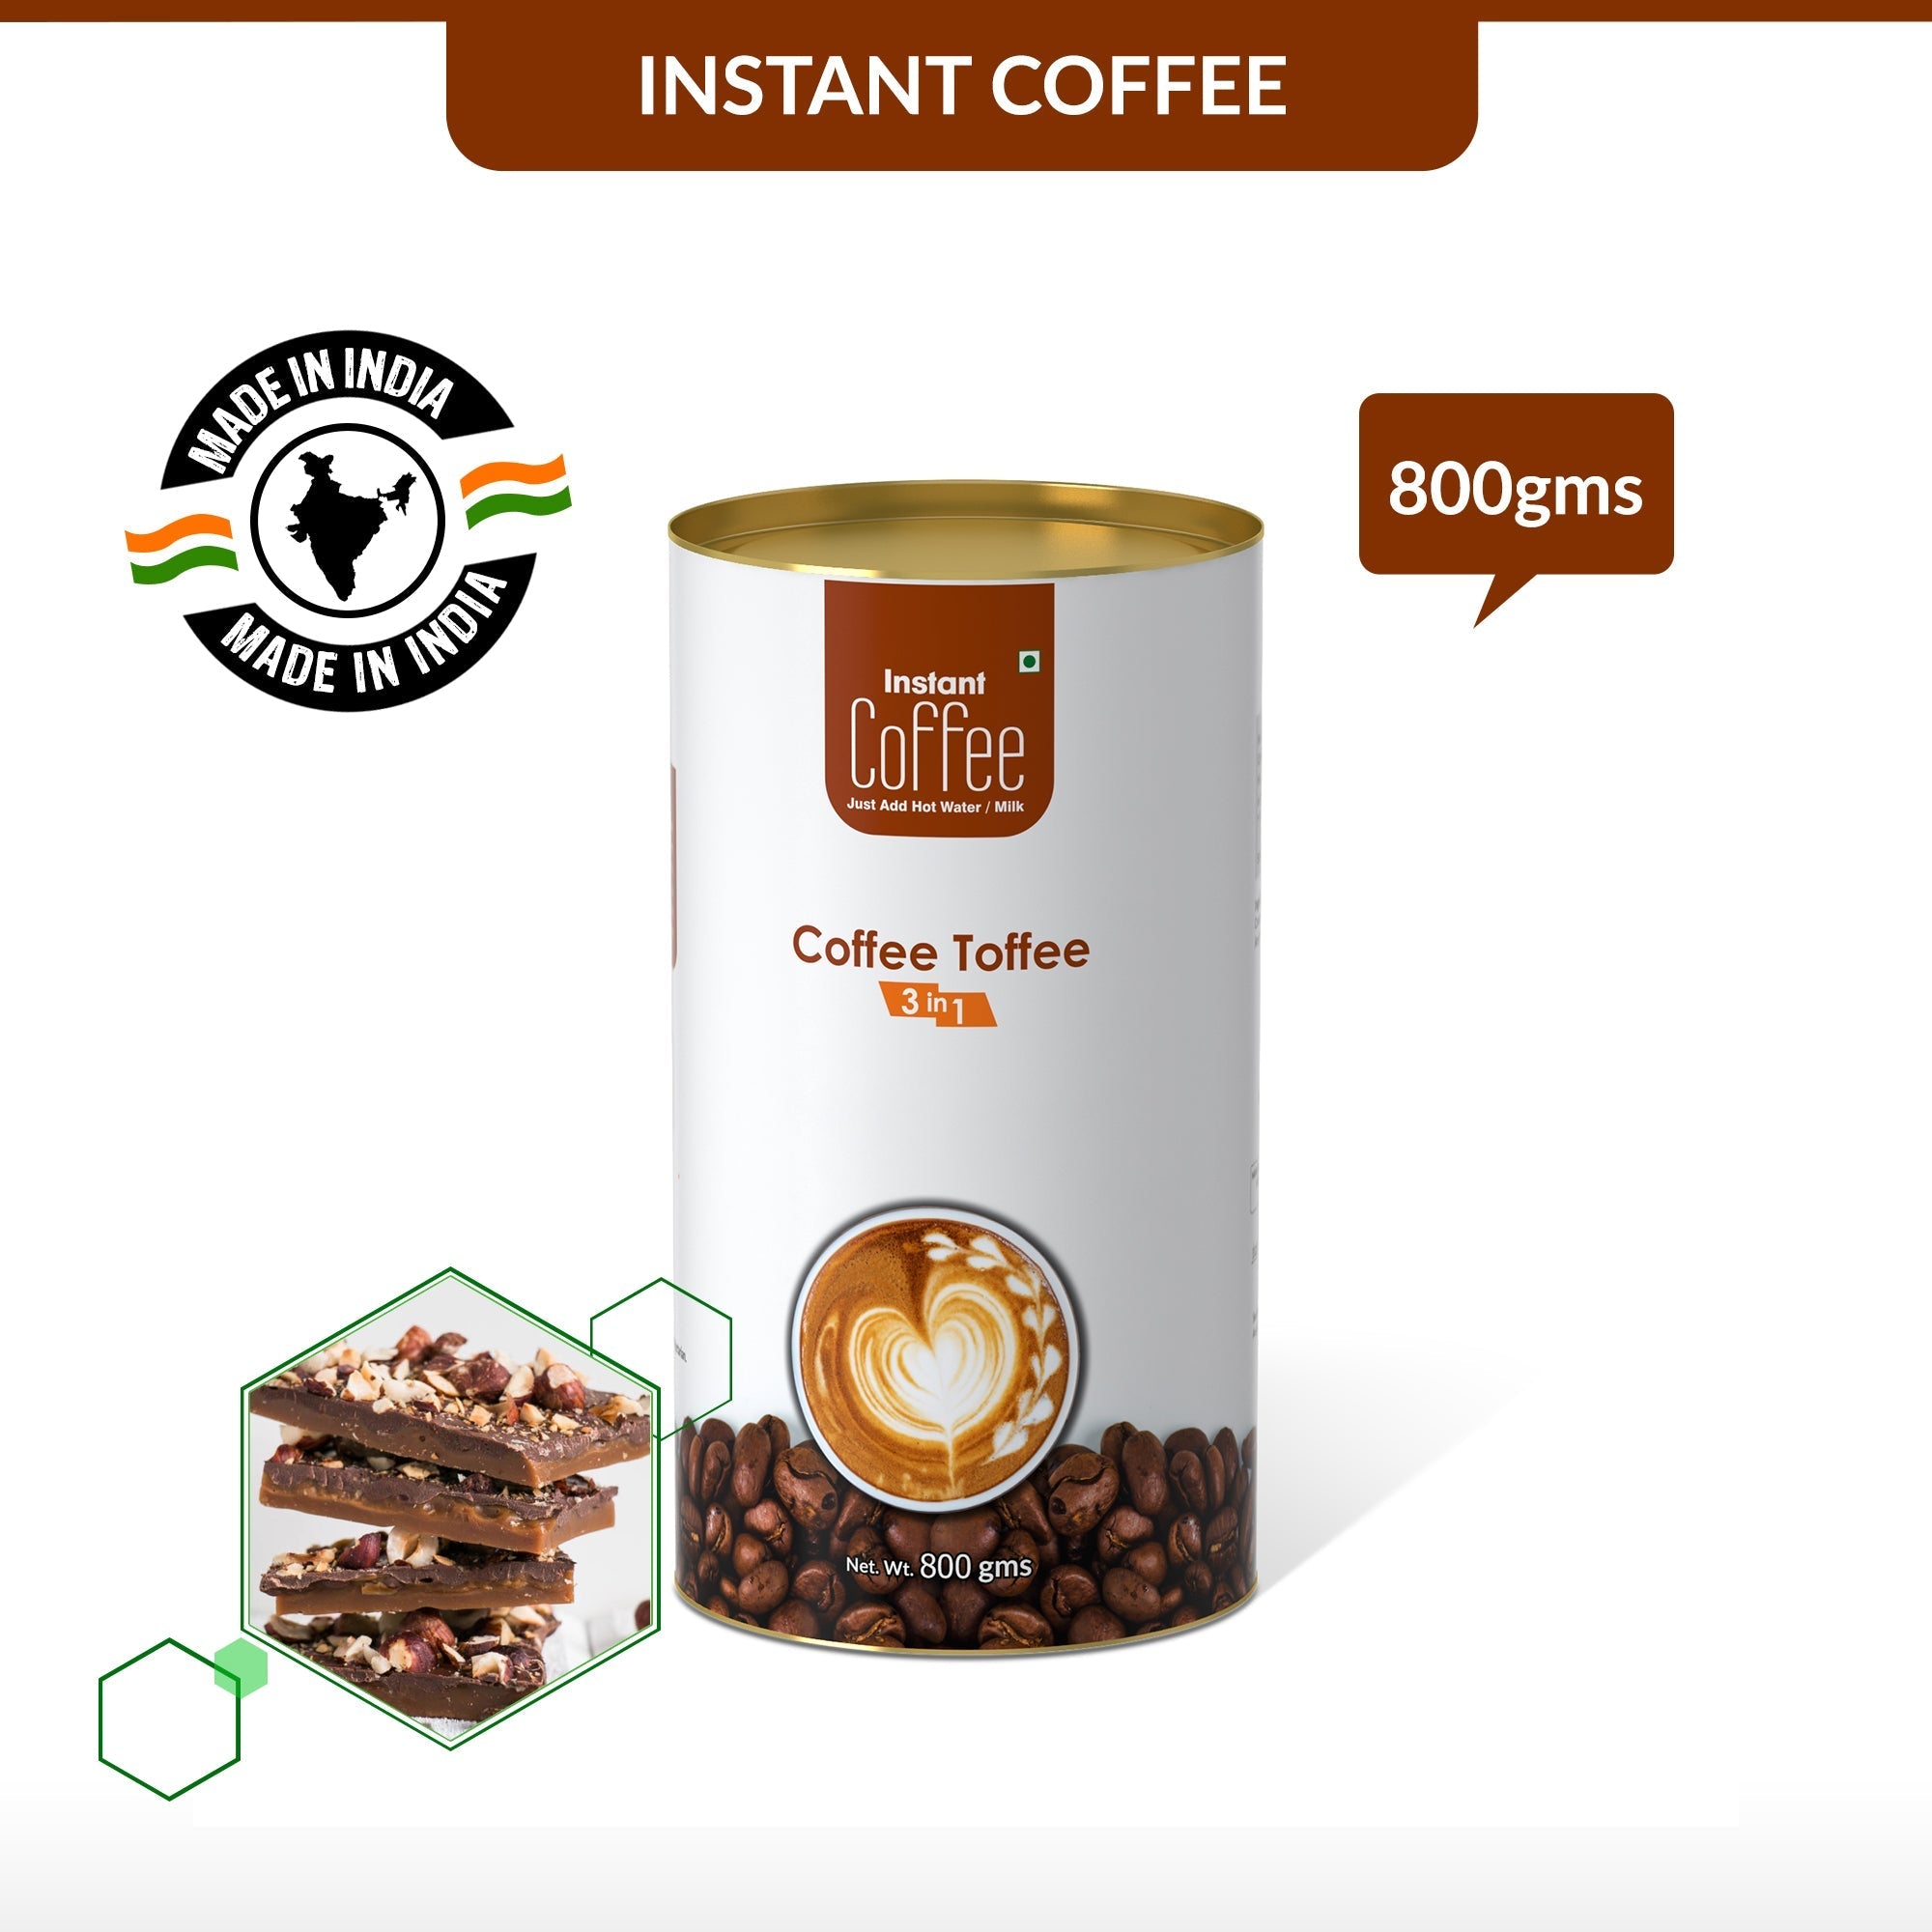 Coffee Toffee Instant Coffee Premix (3 in 1) - 800 gms